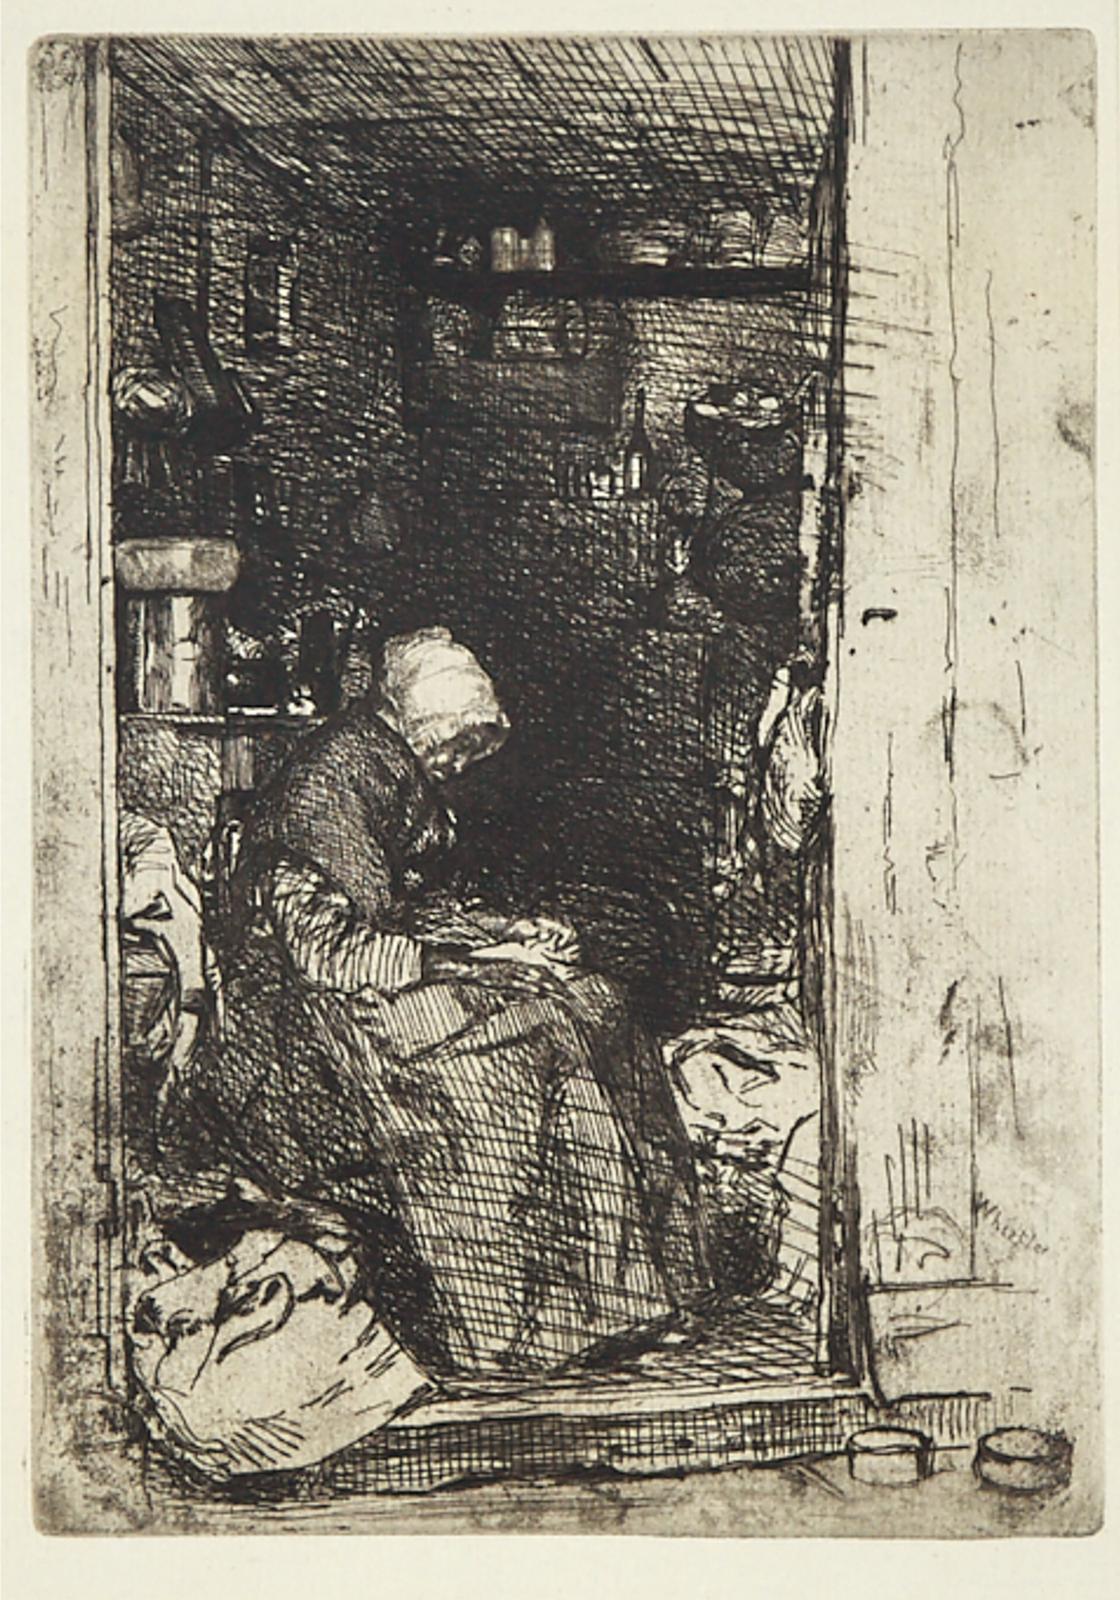 James Abbott McNeill Whistler (1834-1903) - La Veille Aux Loques (From Twelve Etchings From Nature), 1858 [kennedy, 21] Printed Later, 1919?